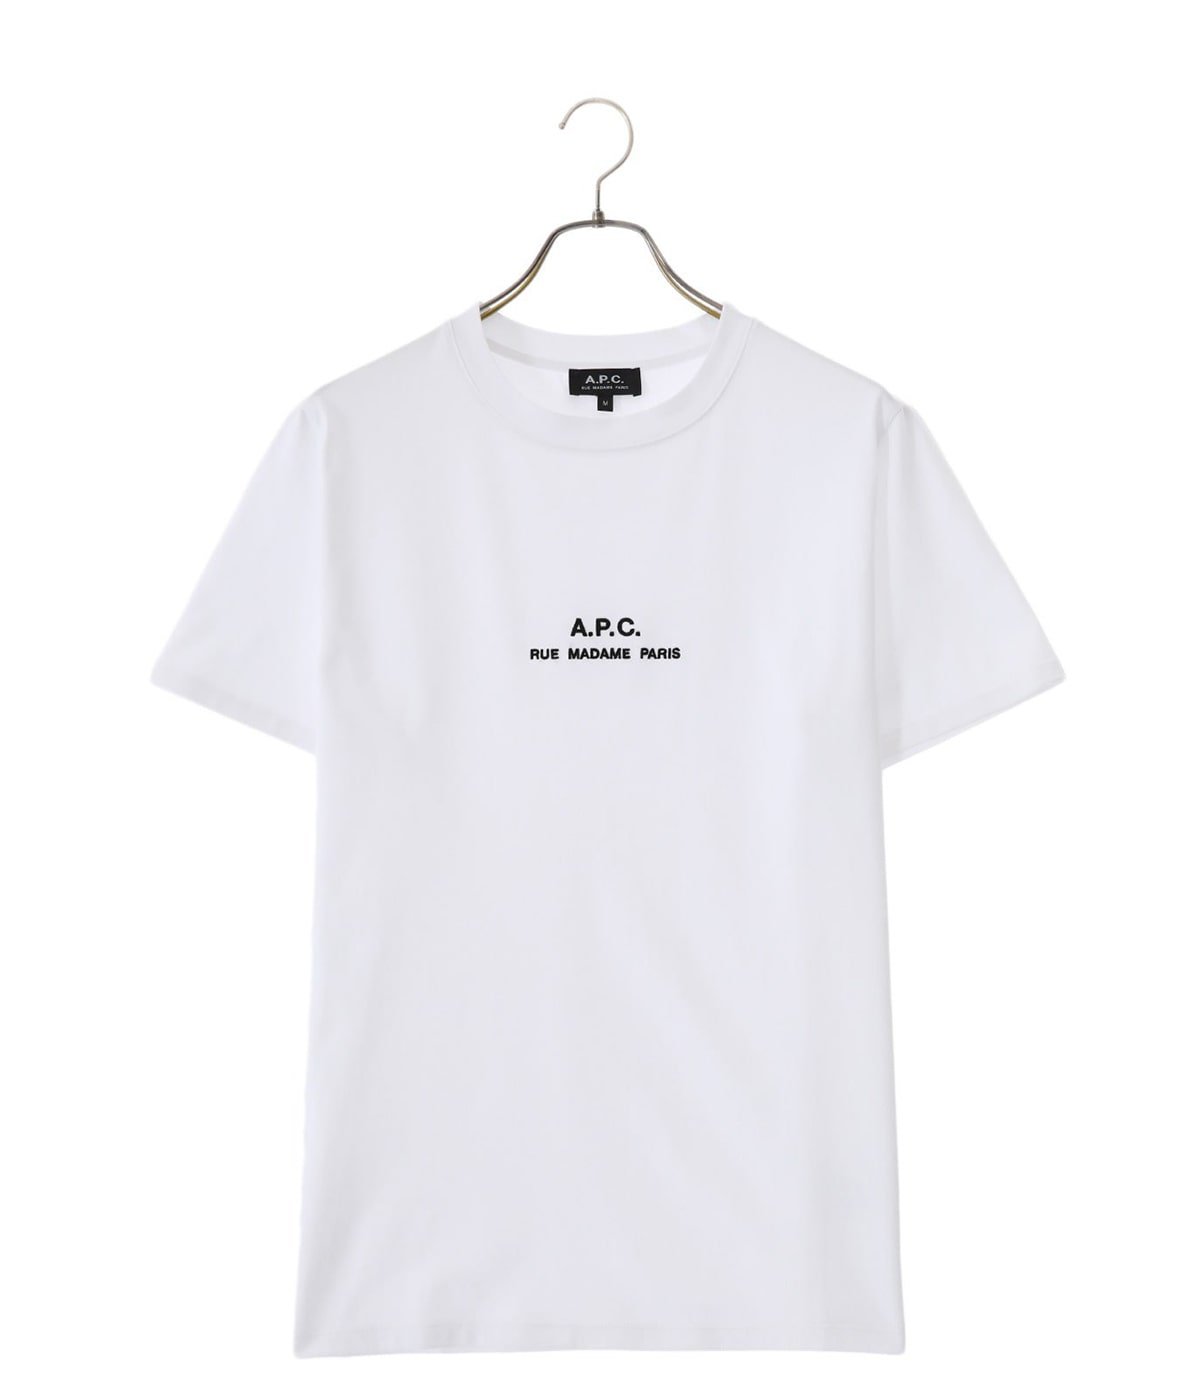 A.P.C. Petite Rue Madame  カットソー Tシャツ